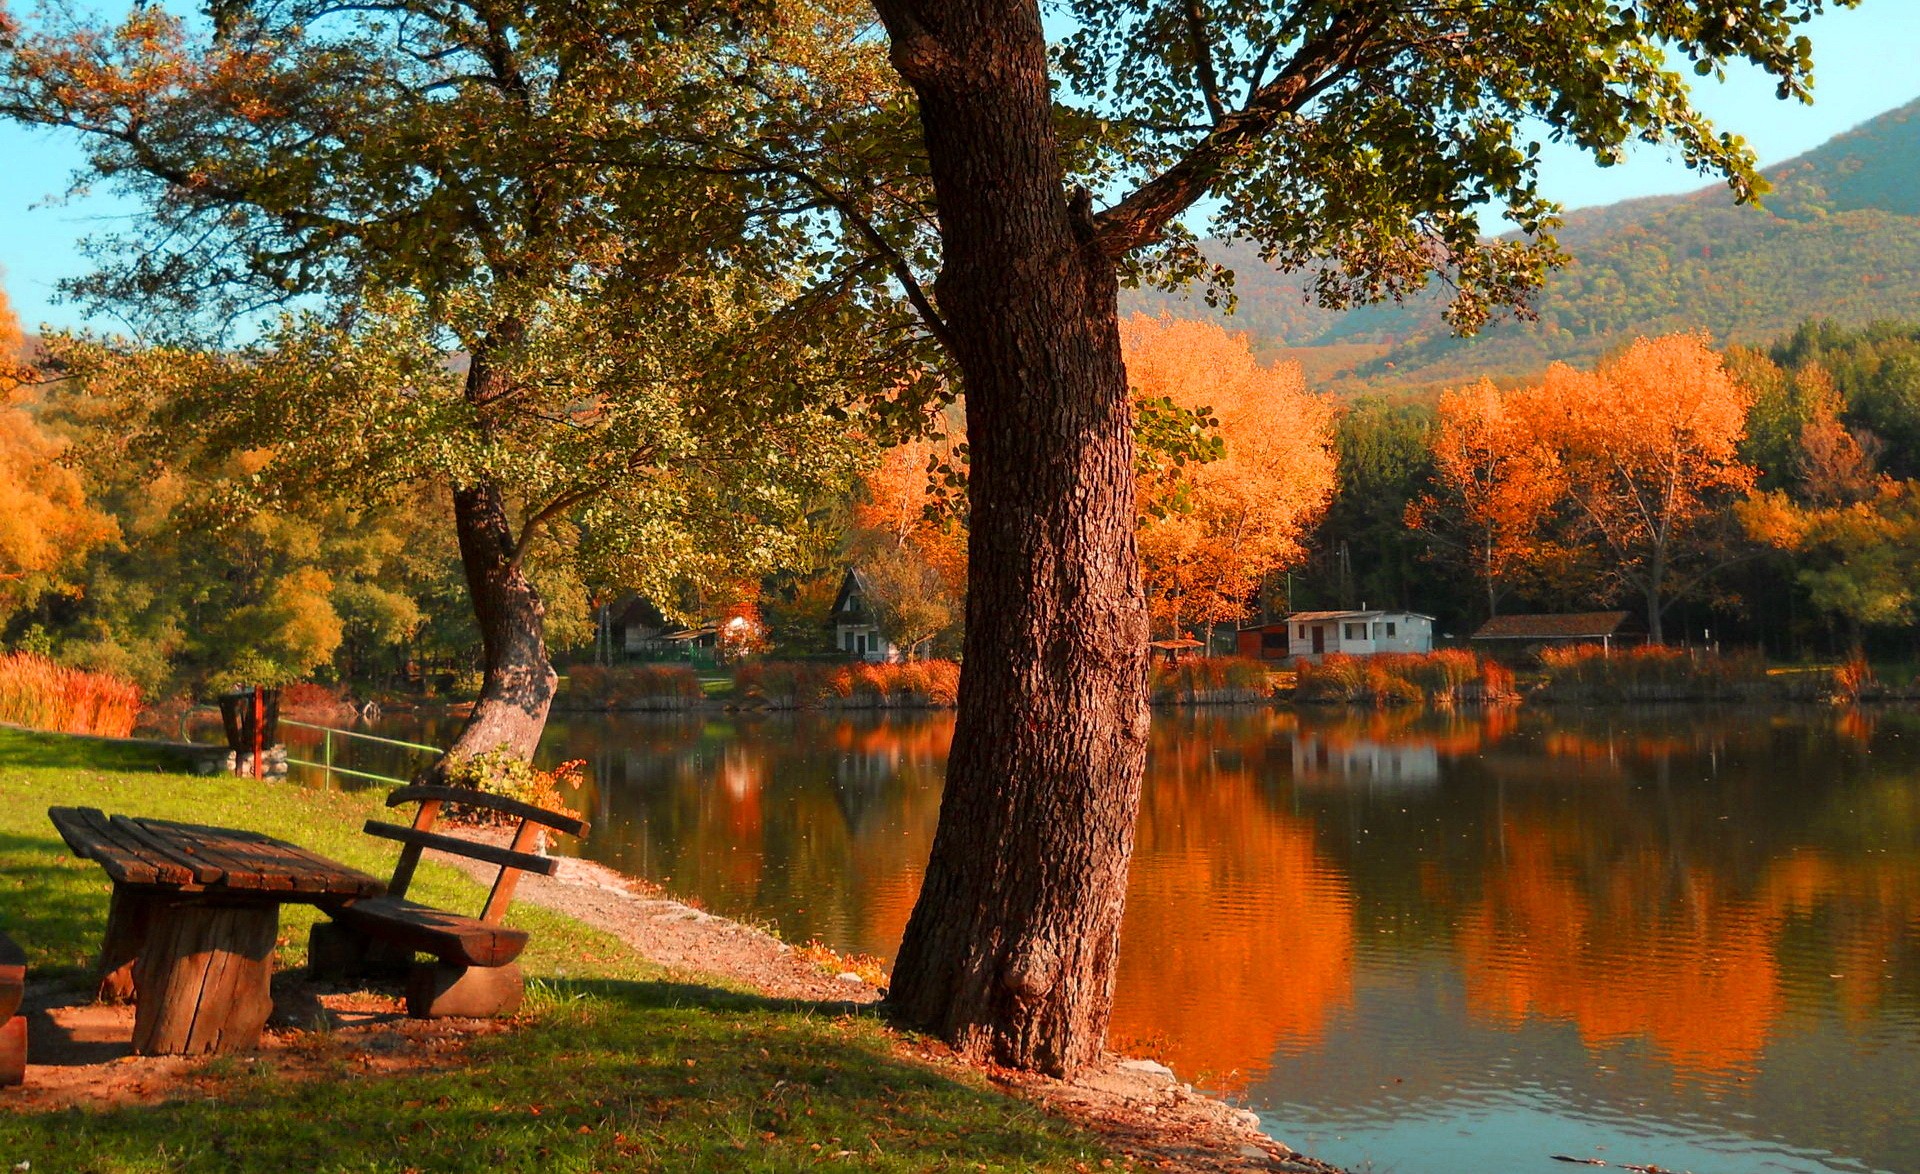 Lakes: Beautiful Village Lake View Trees Leaves Pond Rest Calmness ...